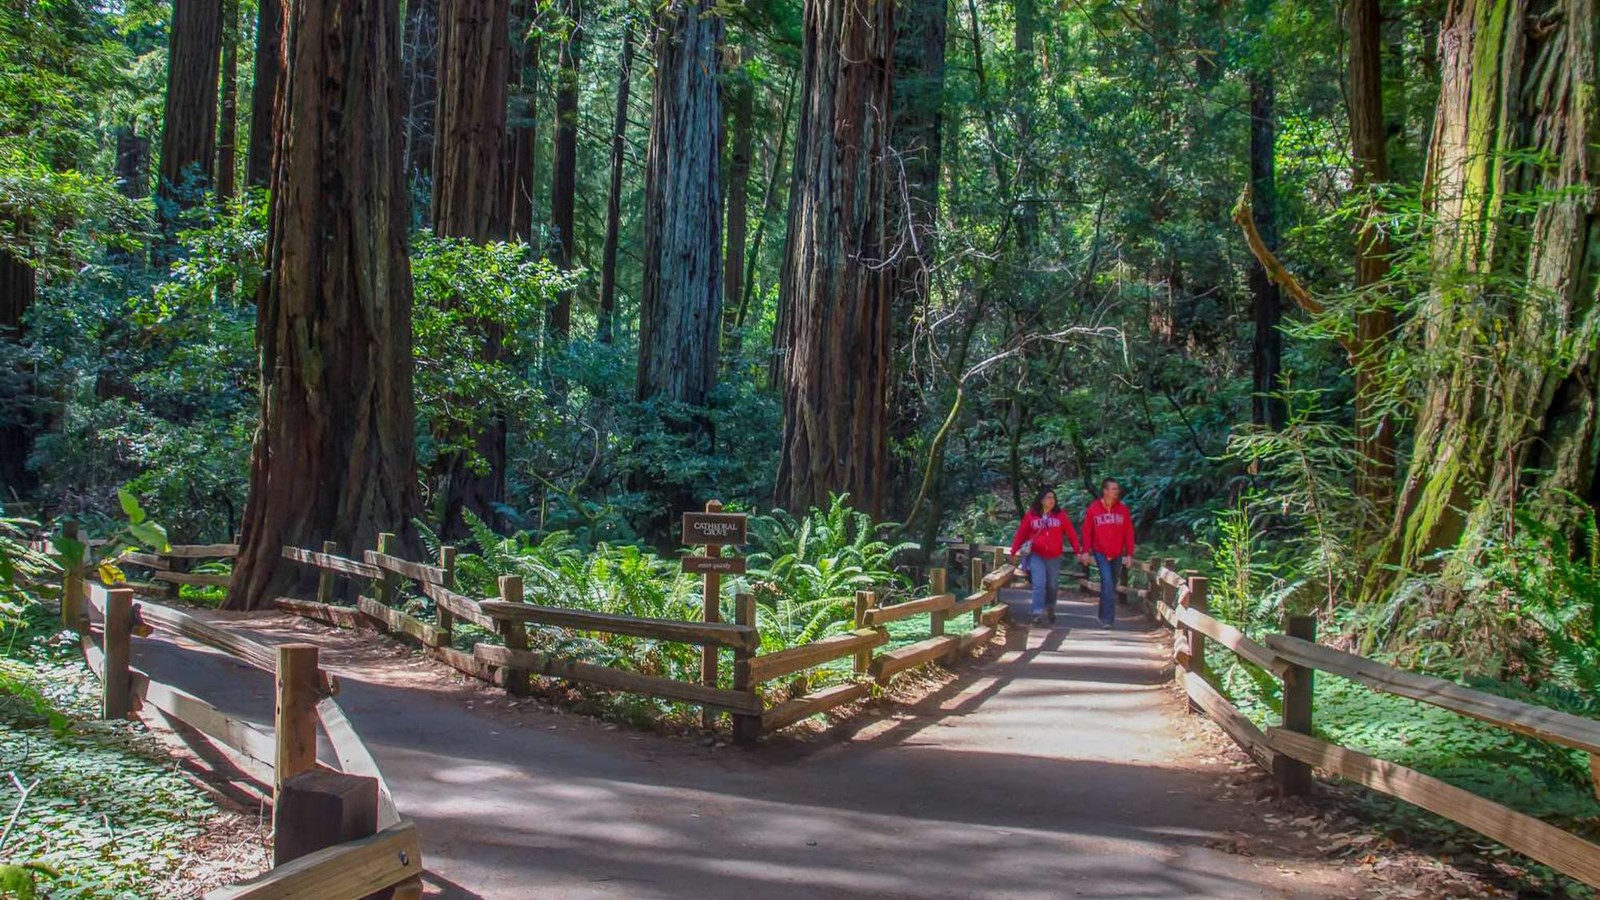  Visitors complete the loop around Cathedral Grove.